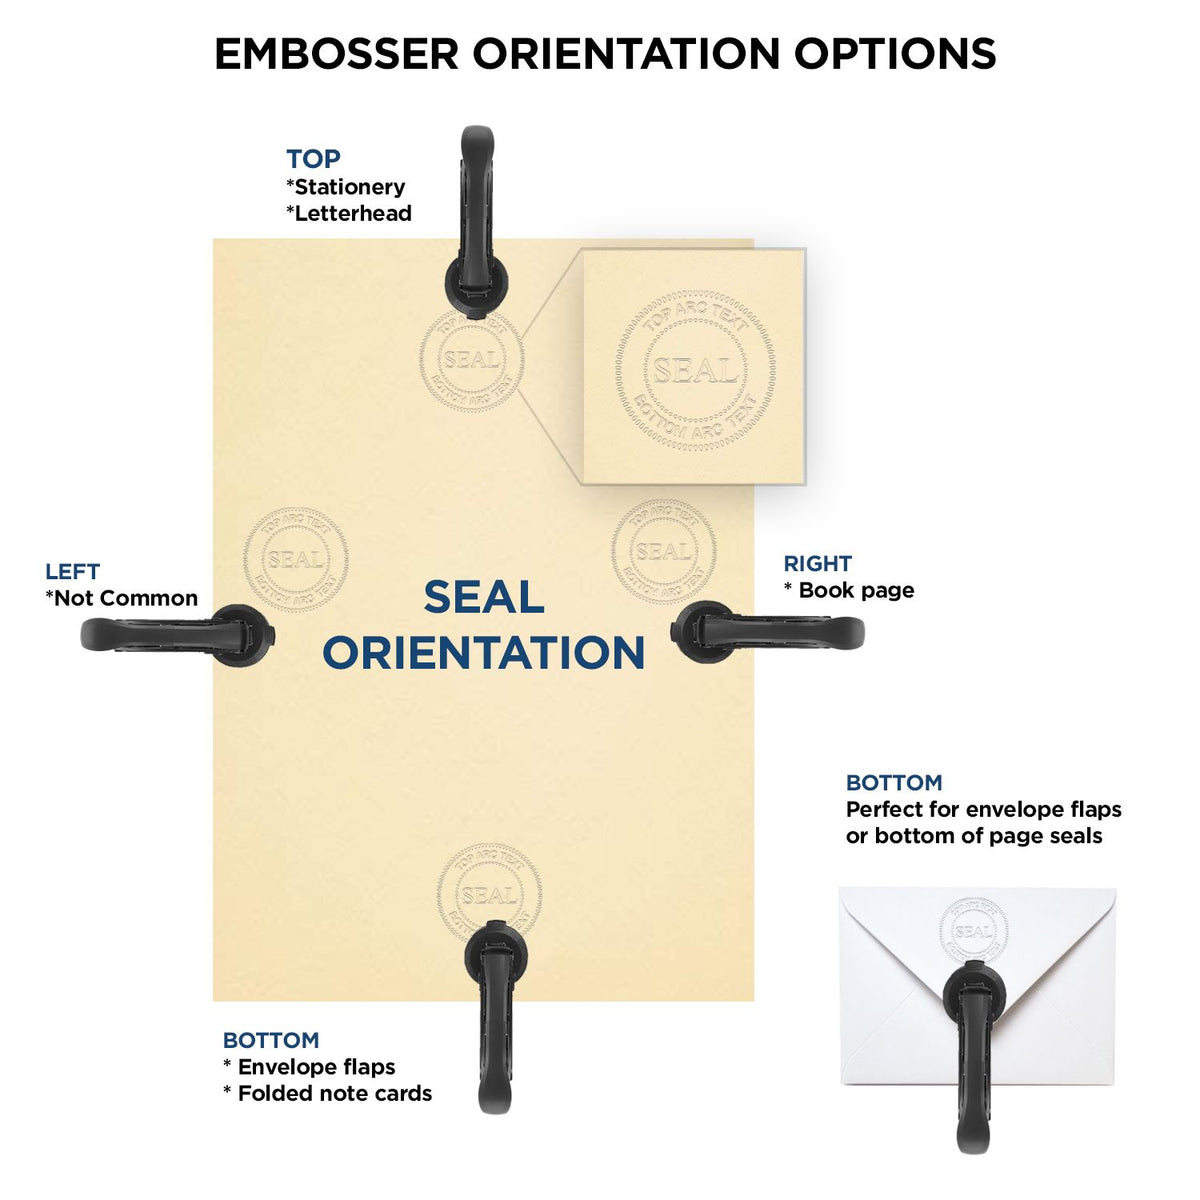 An infographic for the Handheld Hawaii Professional Engineer Embosser showing embosser orientation, this is showing examples of a top, bottom, right and left insert.